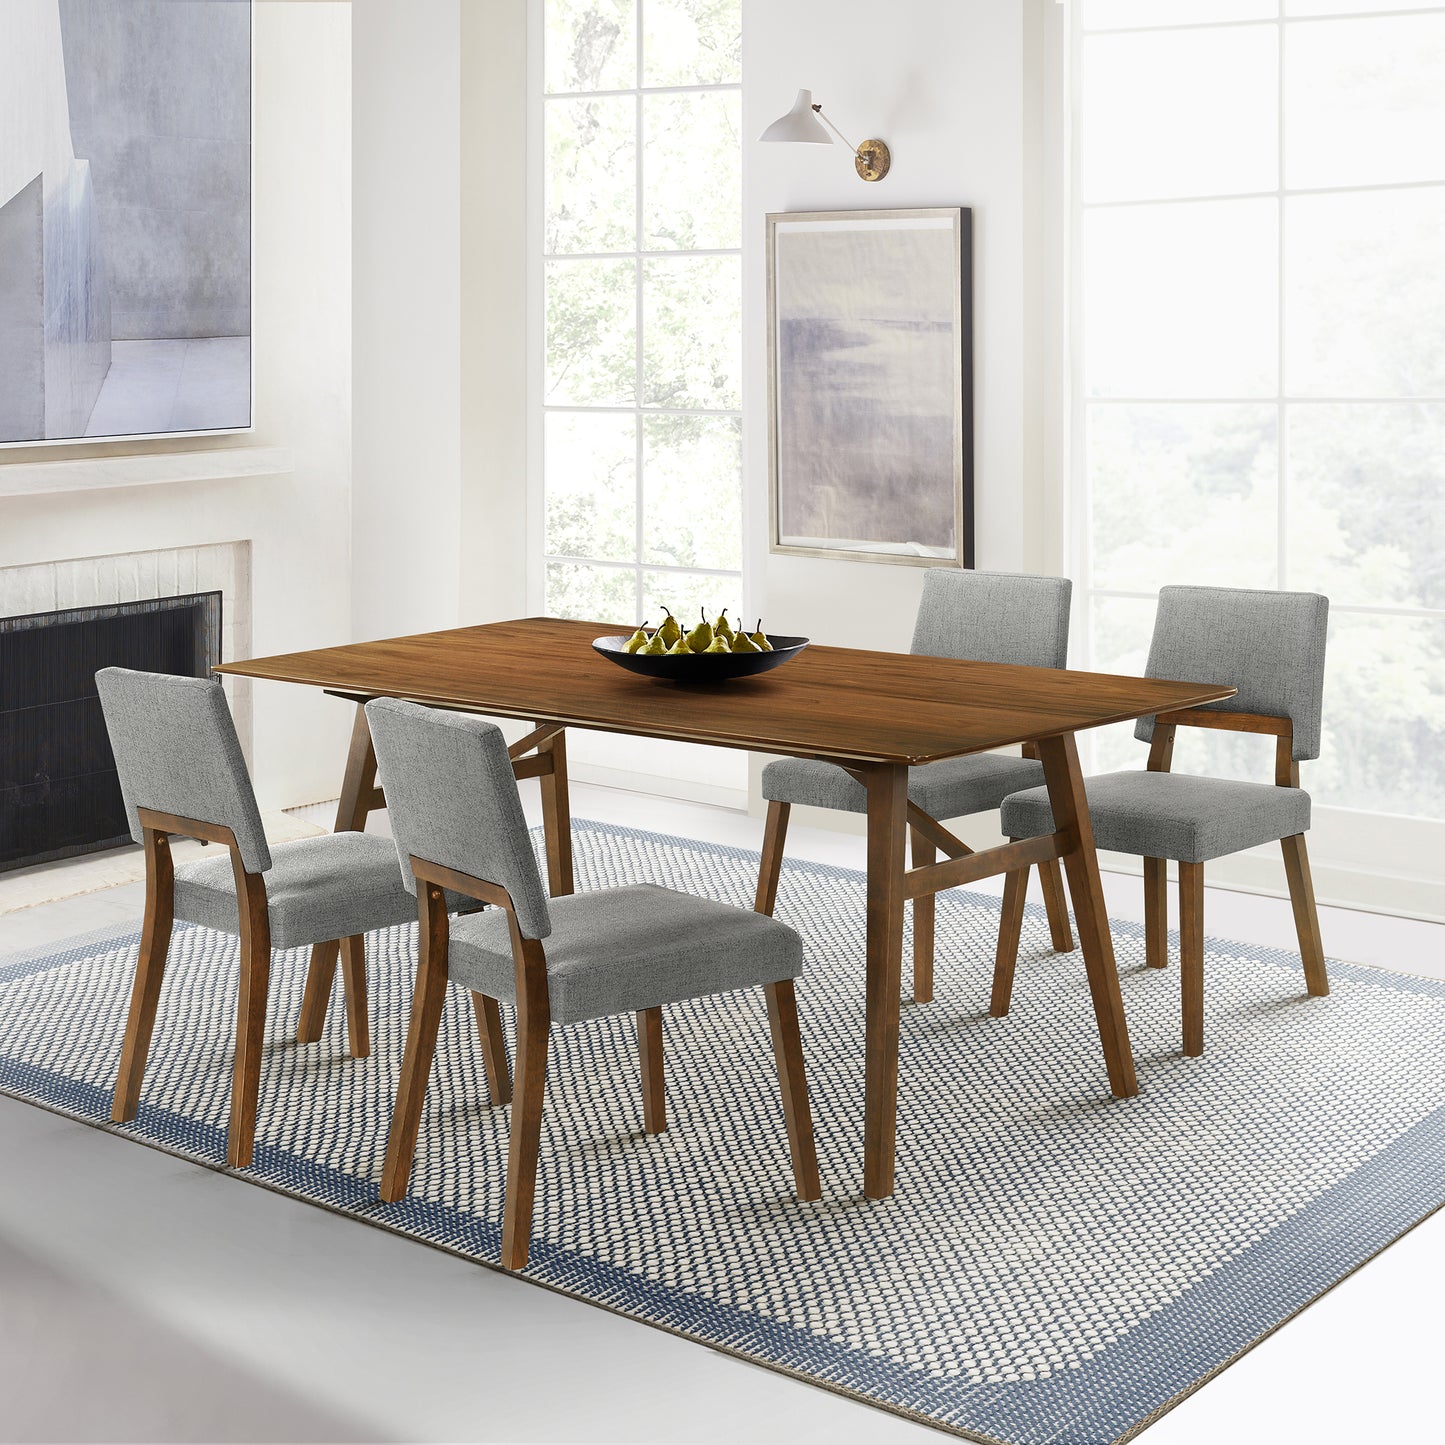 Channell 5 Piece Walnut Wood Dining Table Set with Charcoal Fabric